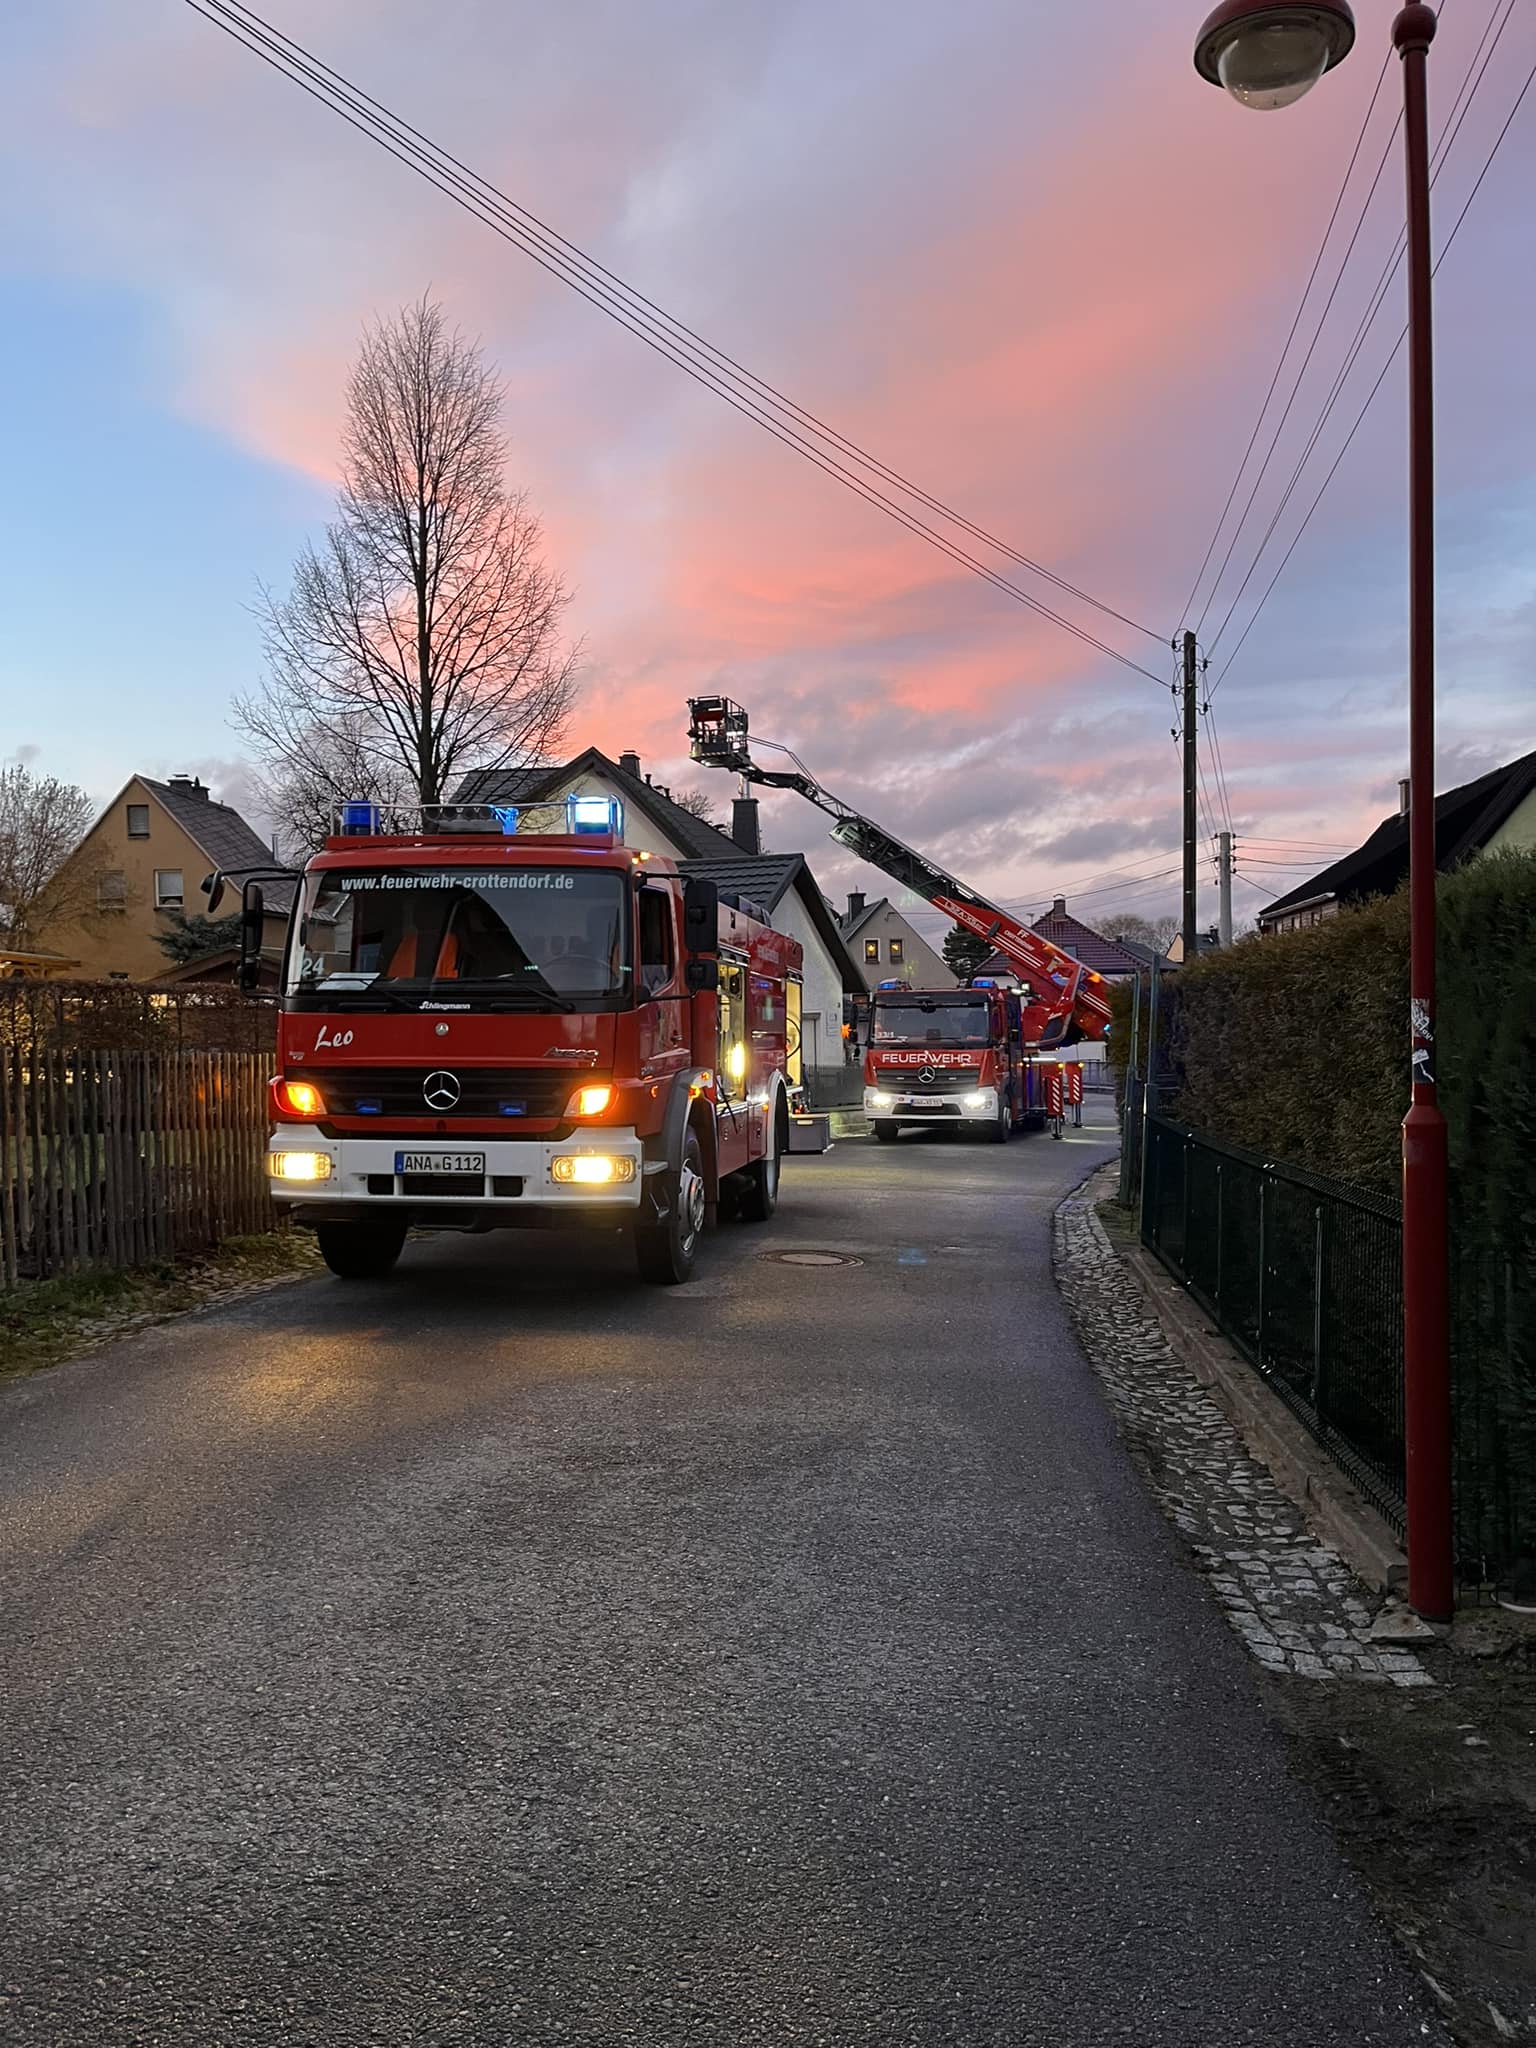 You are currently viewing Brand 2 – Crottendorf- Schornsteinbrand